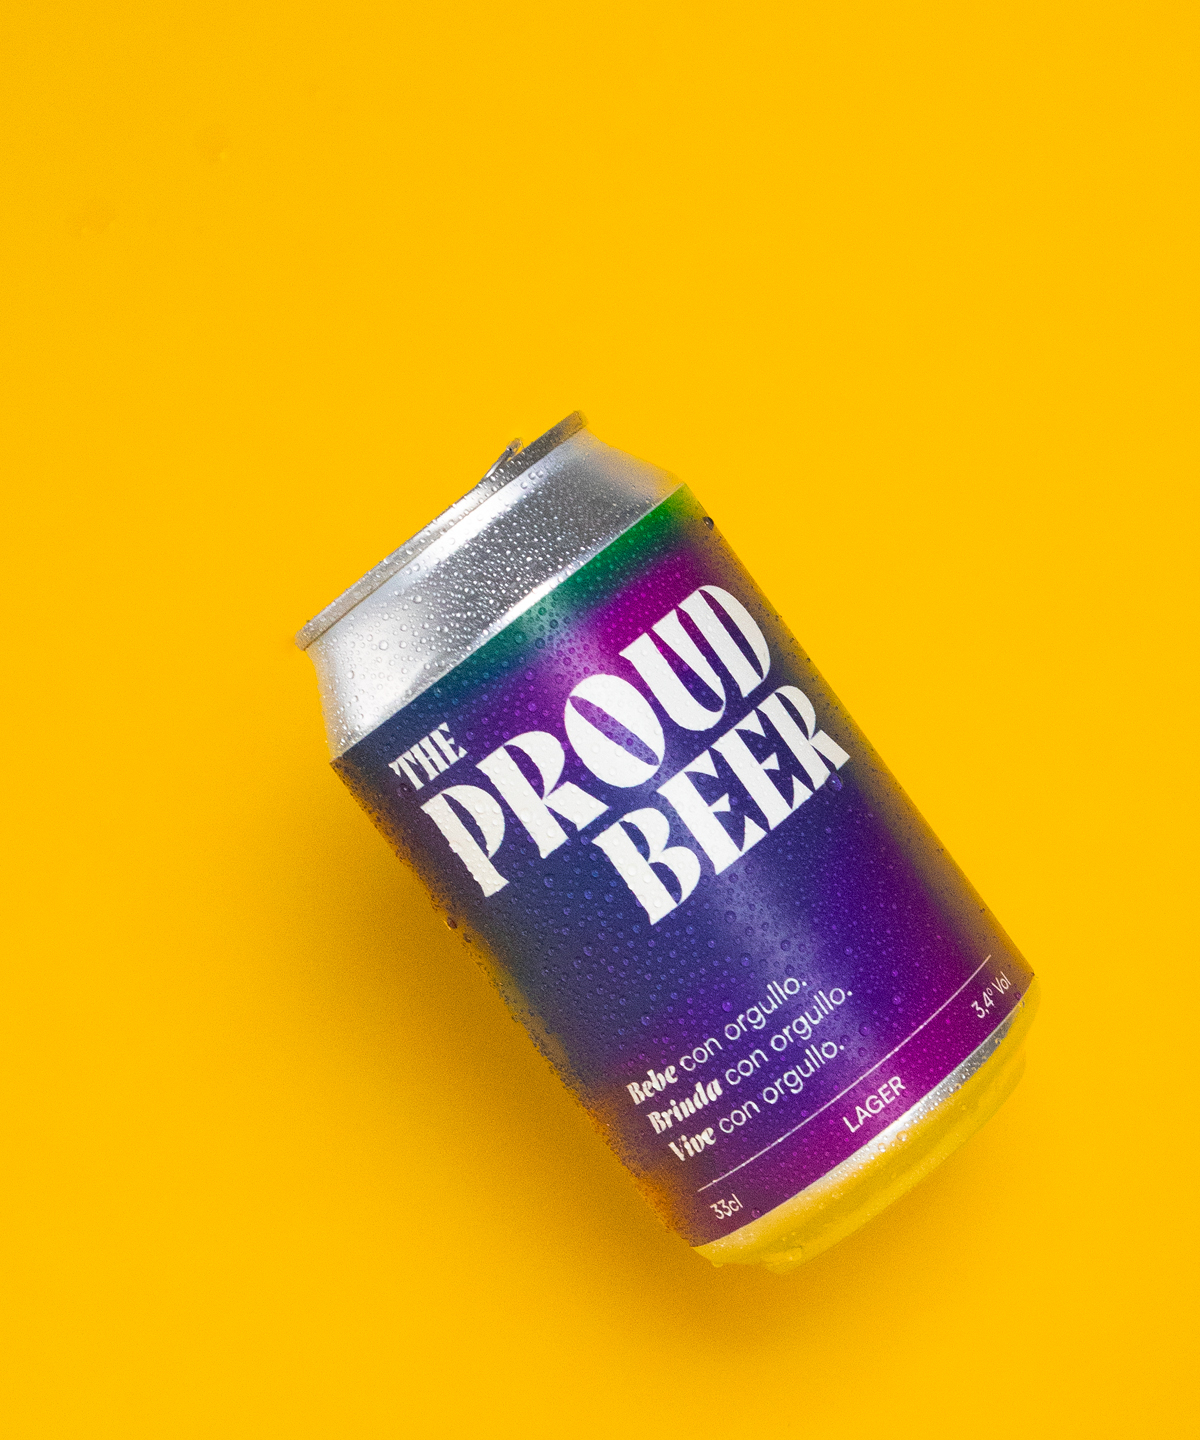 The Proud Beer by Avocado - Creative Work - $i